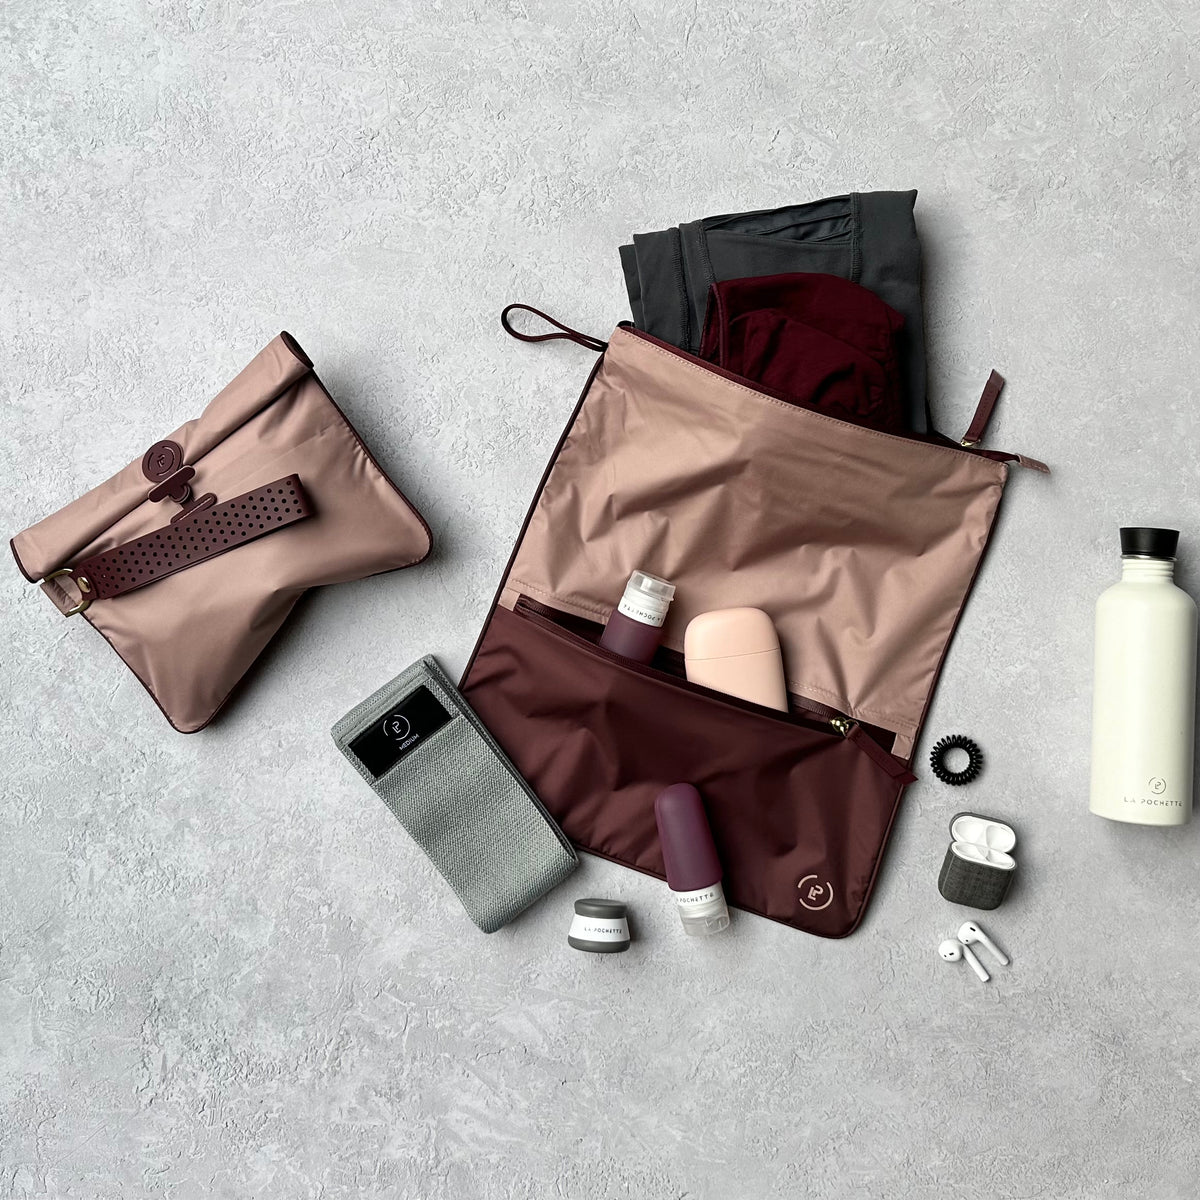 Sweat bag and wet bag in rose oxblood clourway with travel bottles and pots and water bottle